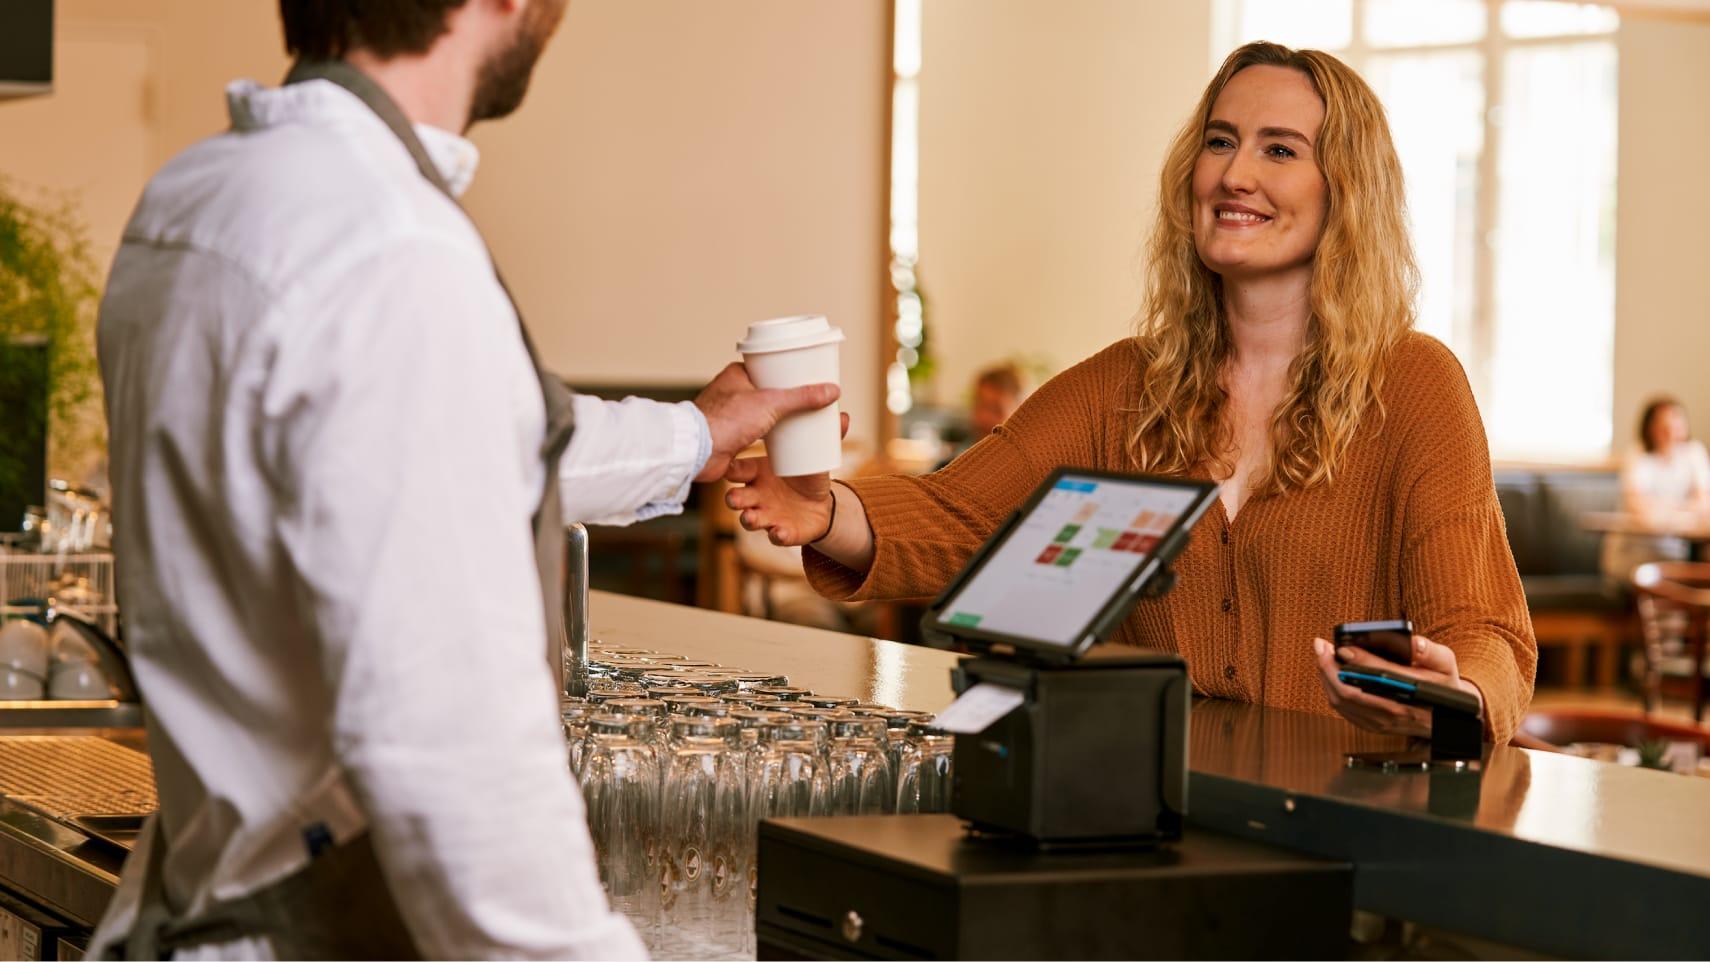 orderbird - Europe's market leader for iPad POS systems for the hospitality business